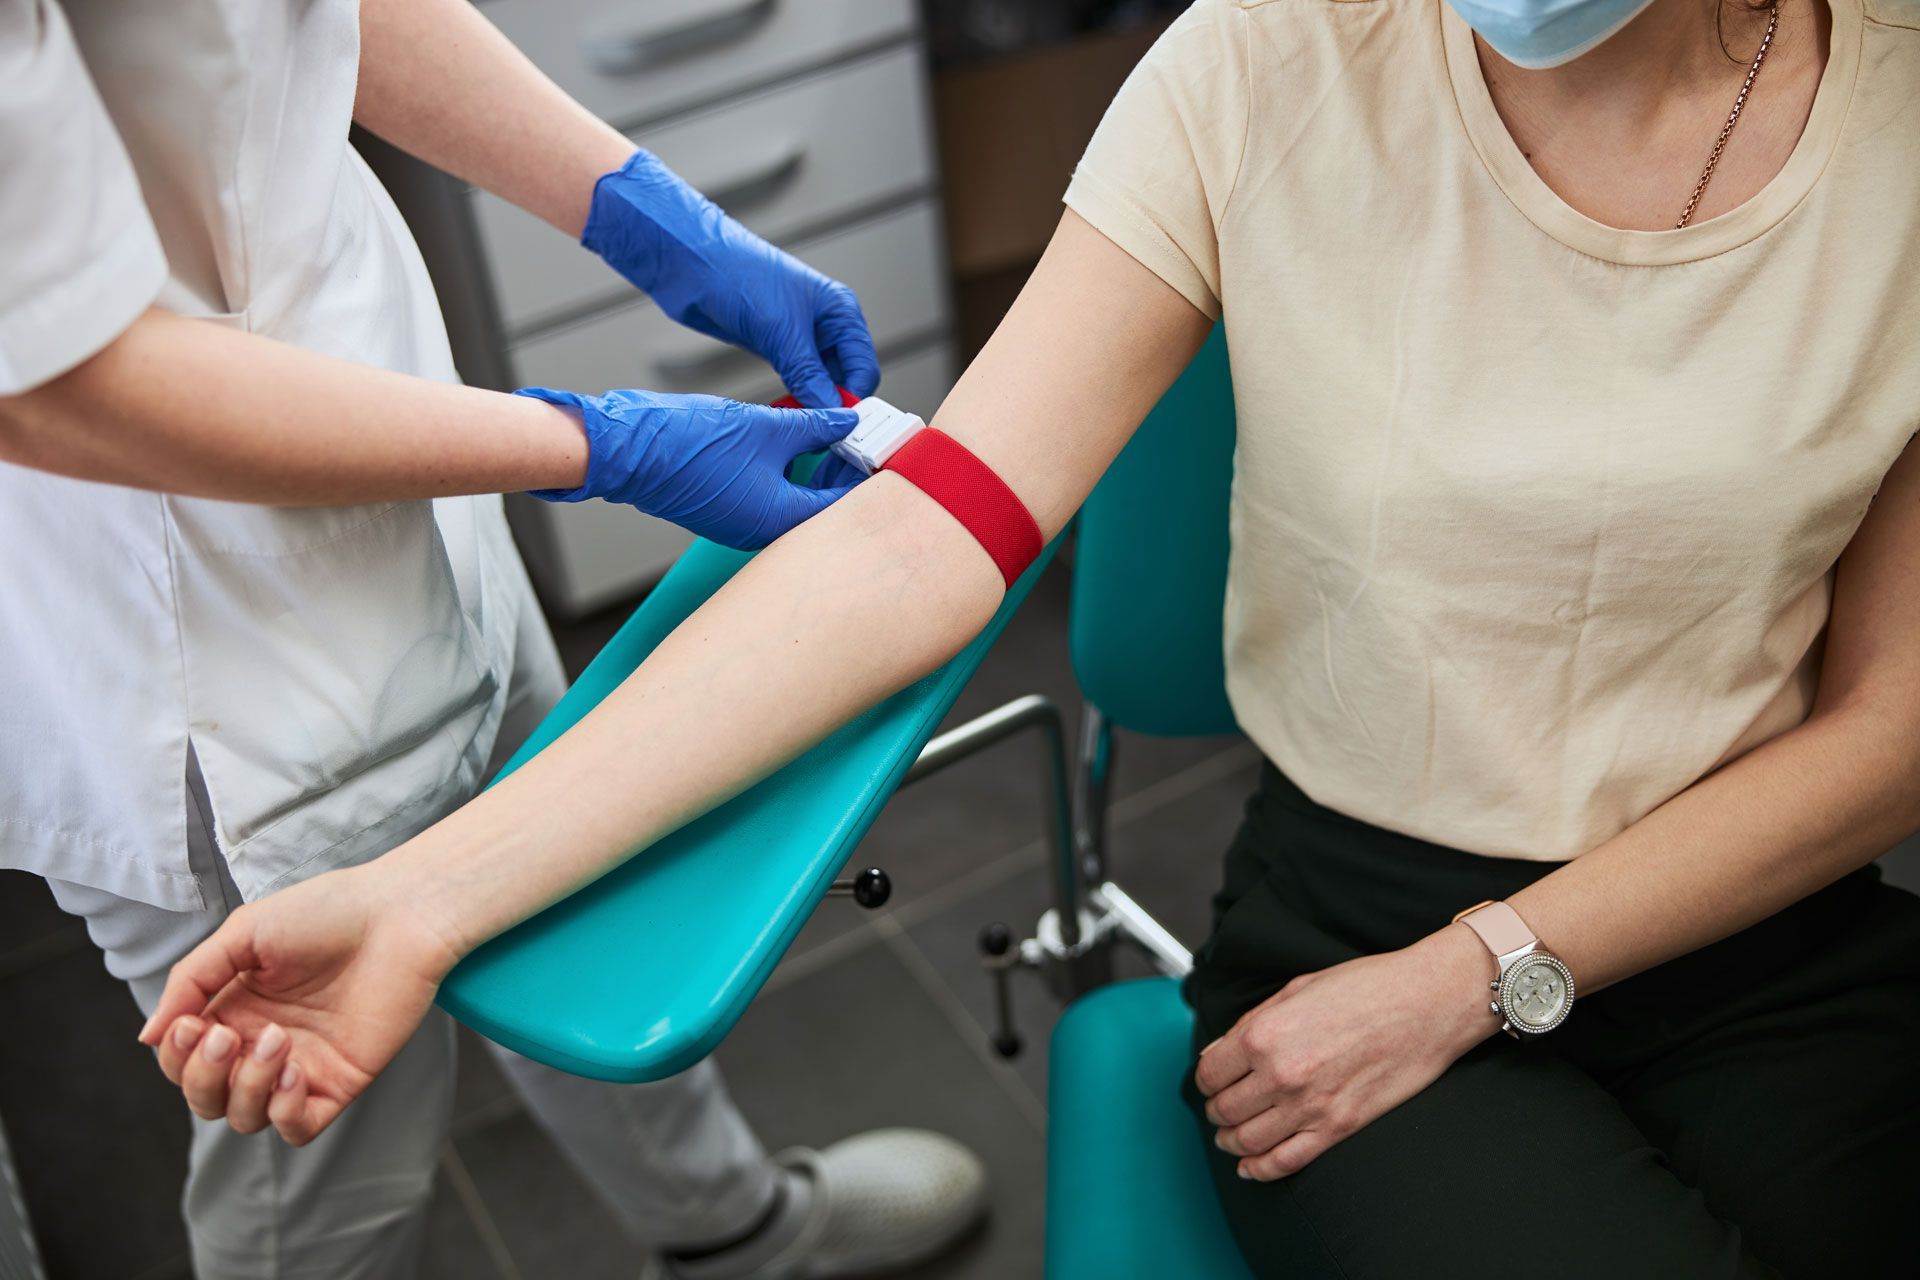 Phlebotomy Technician Tightening the Elastic Band